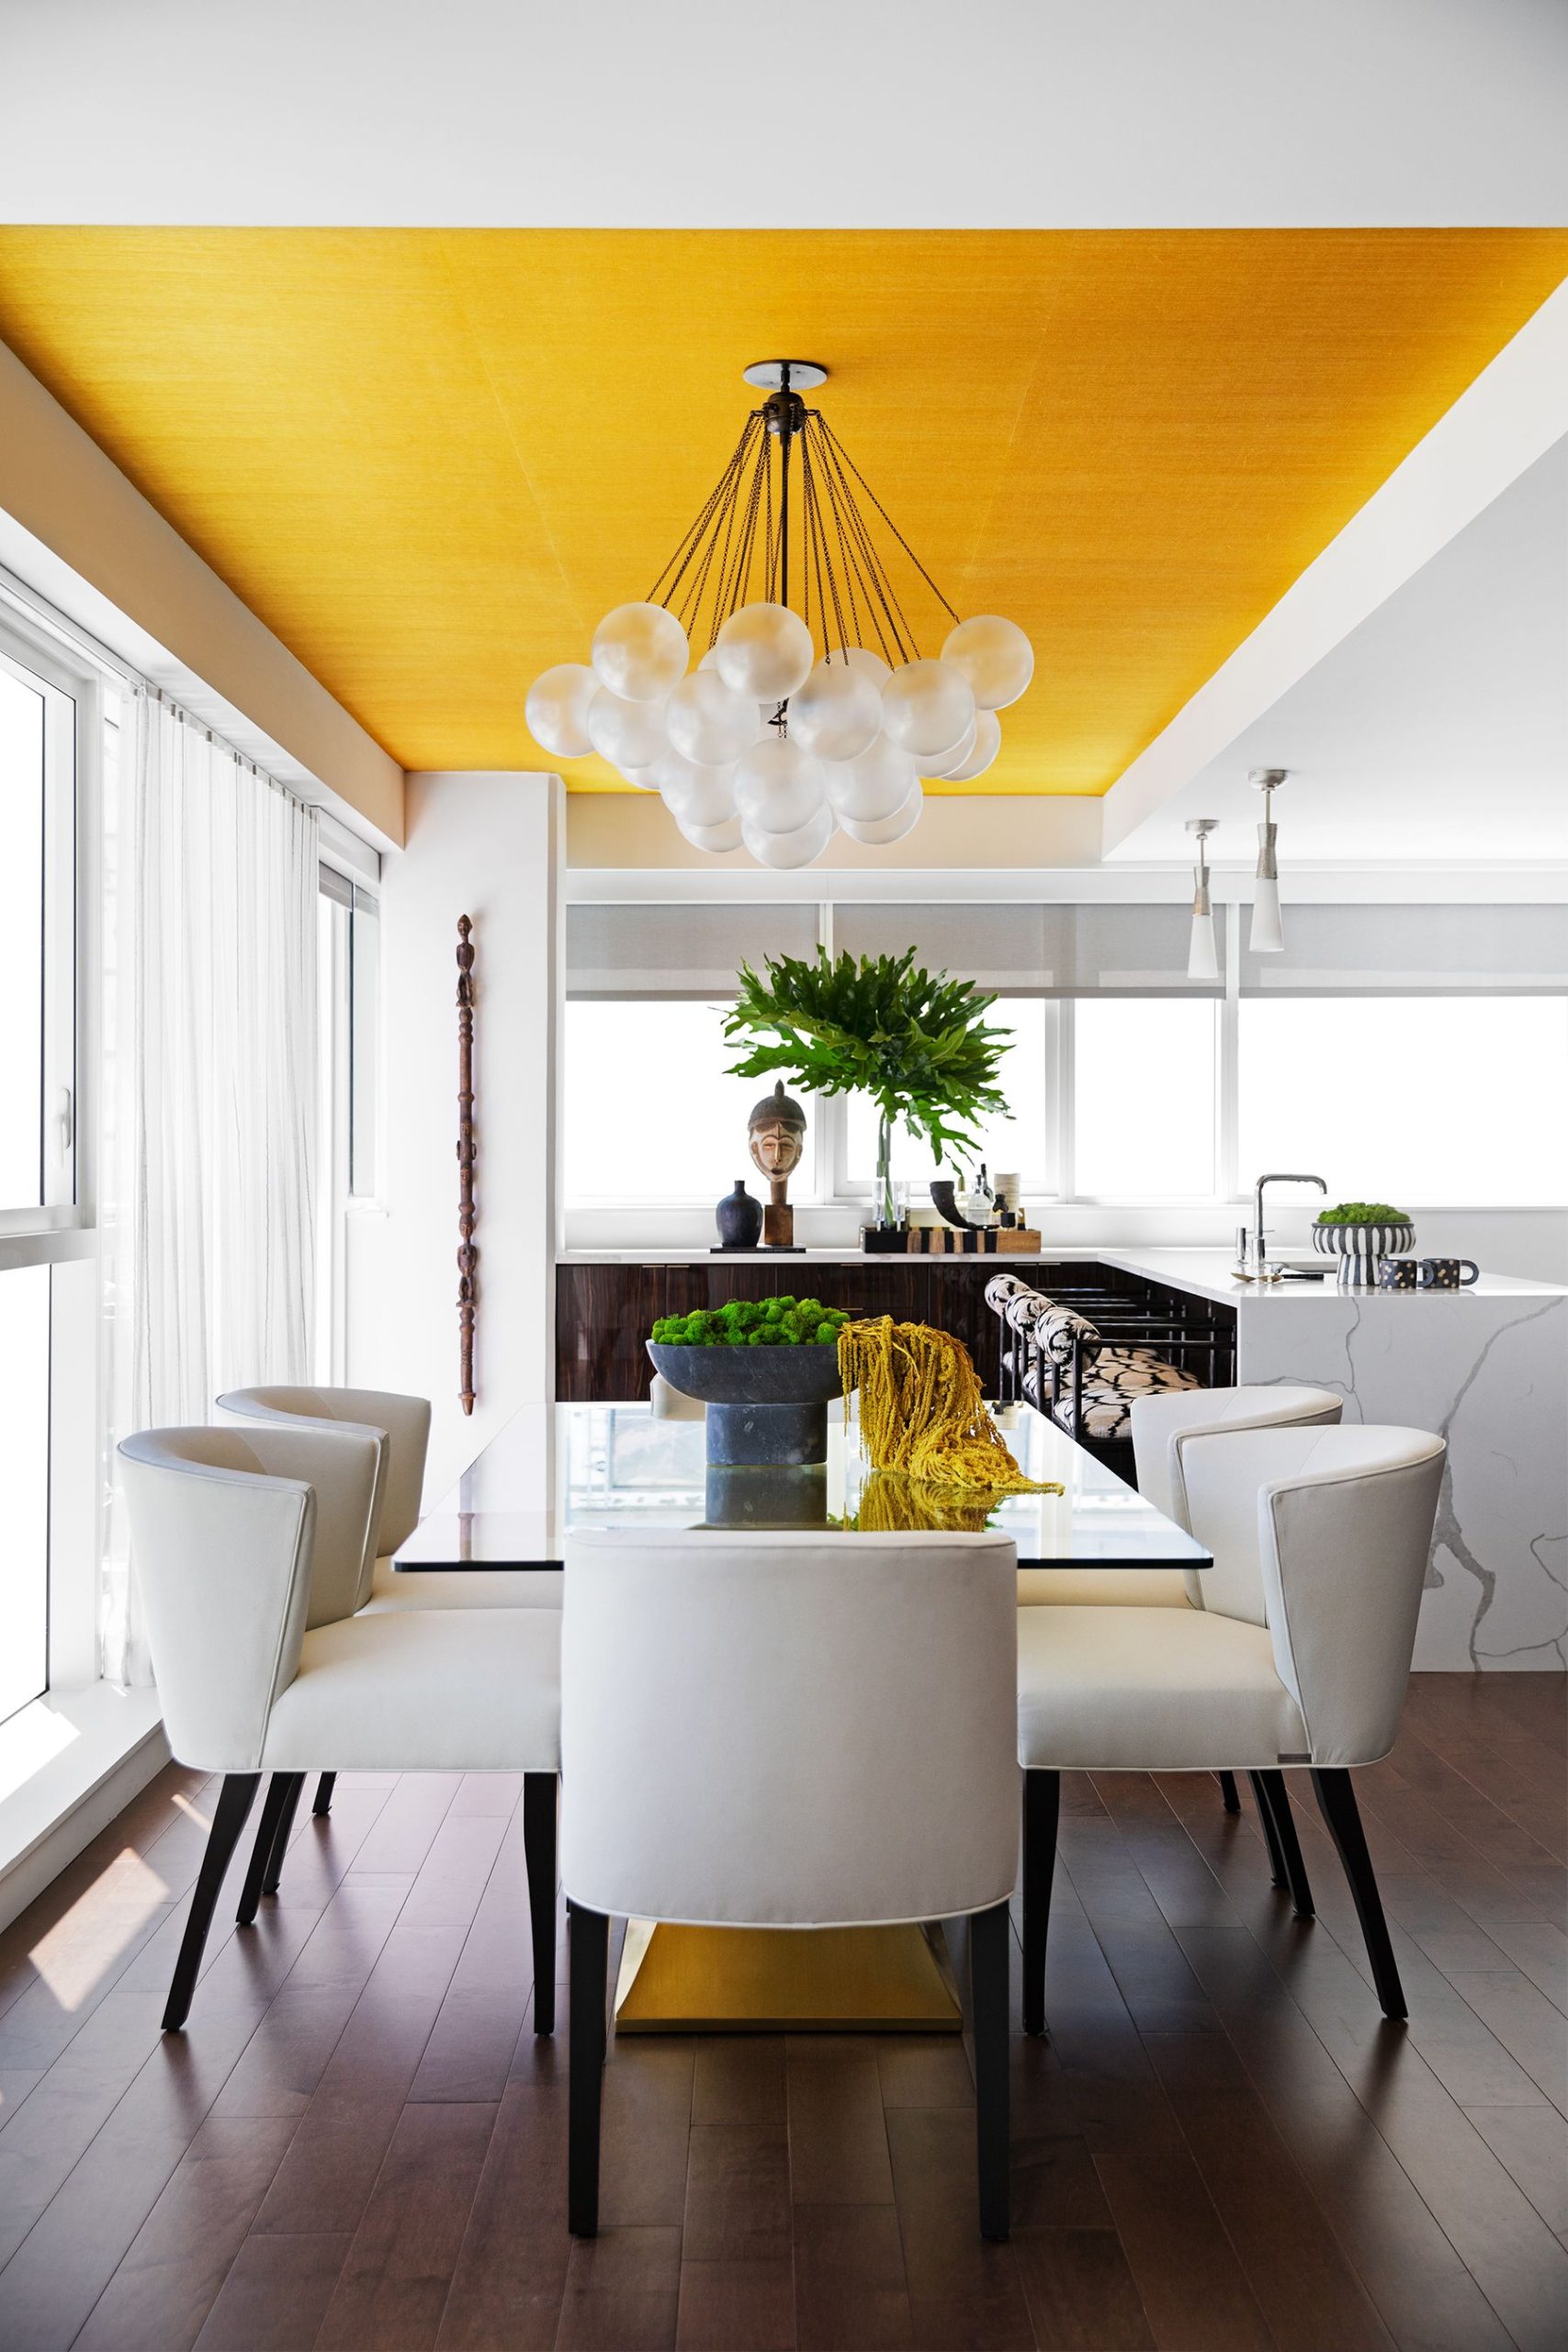 how to decorate a dining table